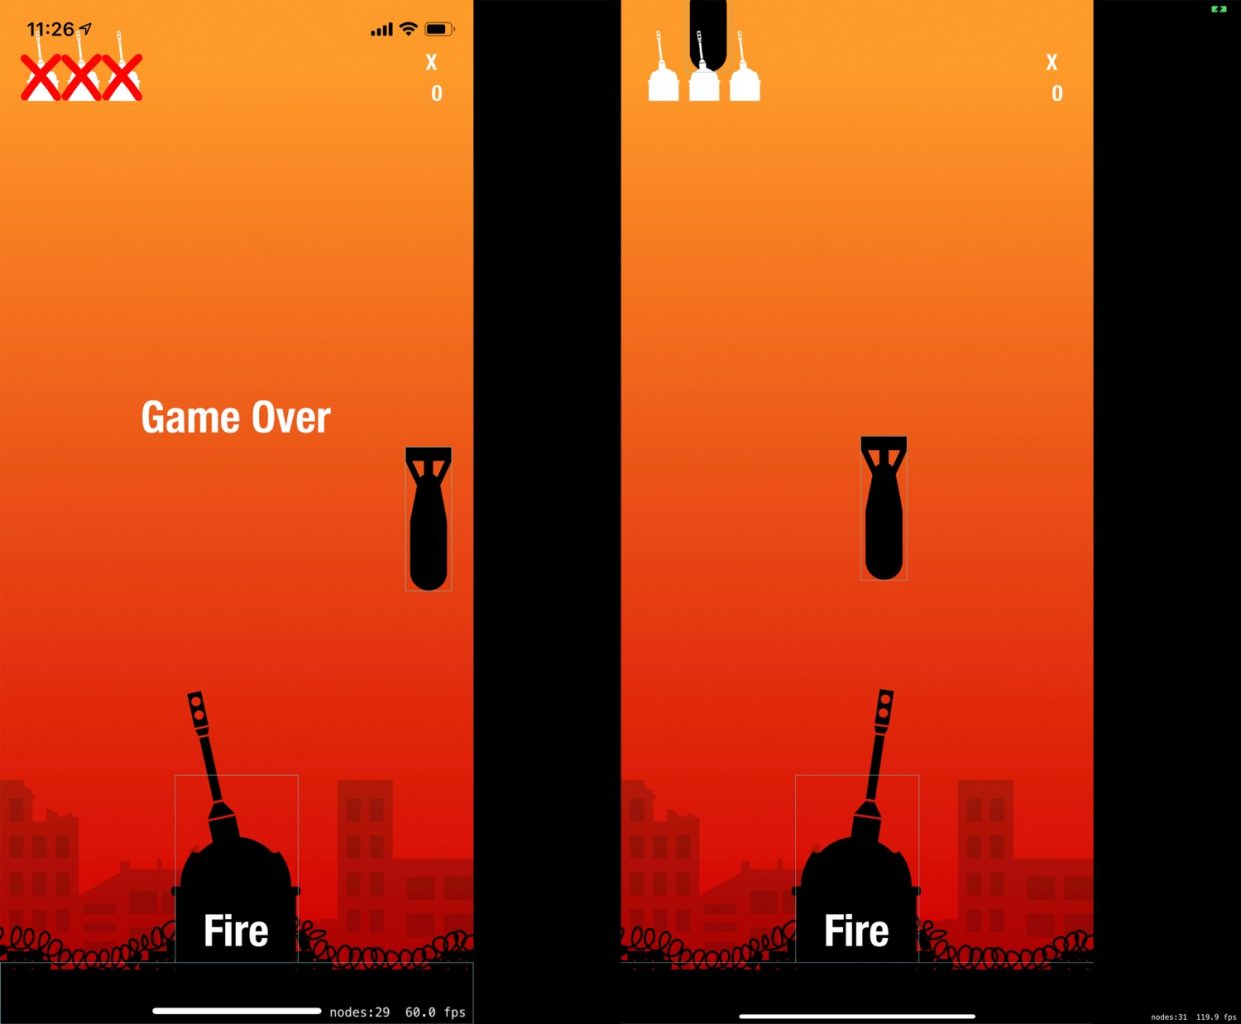 Side-by-side screenshots of Swivel Turret on an iPhone X vs on an iPad. The iPhone version fills up the screen entirely whereas the iPad version has black bars surrounding the game scene on the left and right sides.